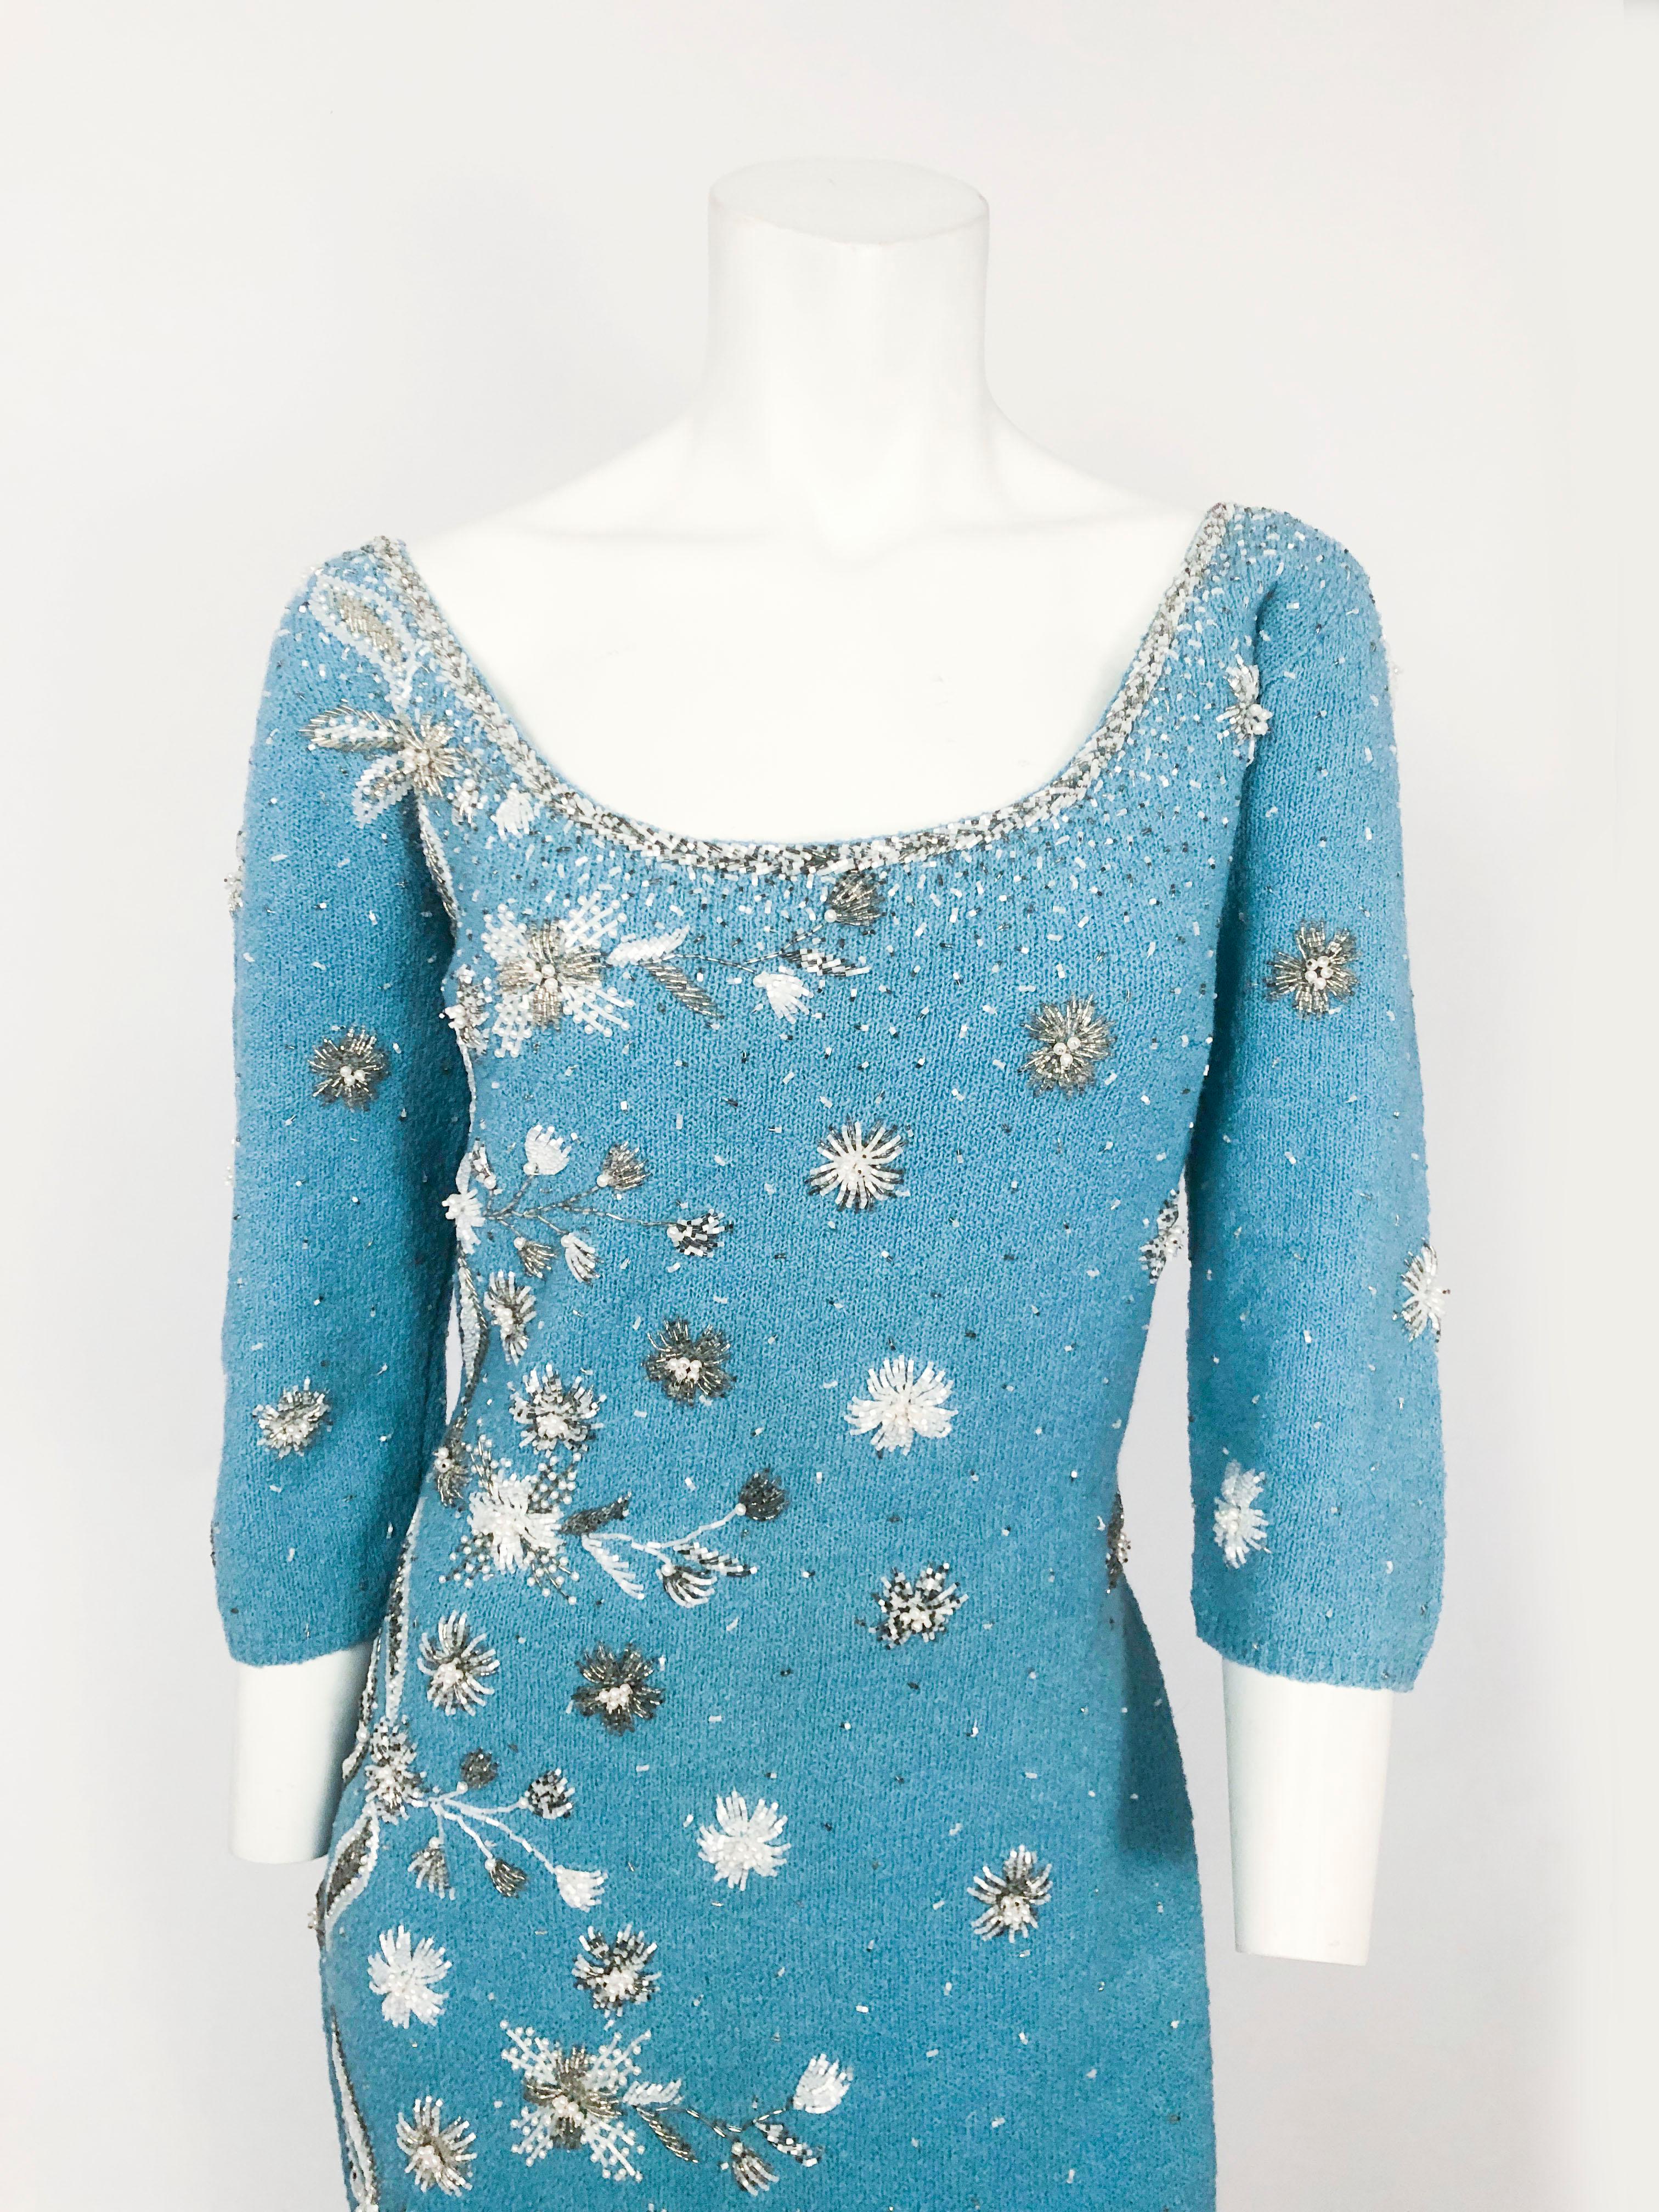 1950s Aqua Knit Dress with Hand Beading Accents that form floral and dot patterns. Scoop neckline, 3/4 sleeves, and partial lining on the inside